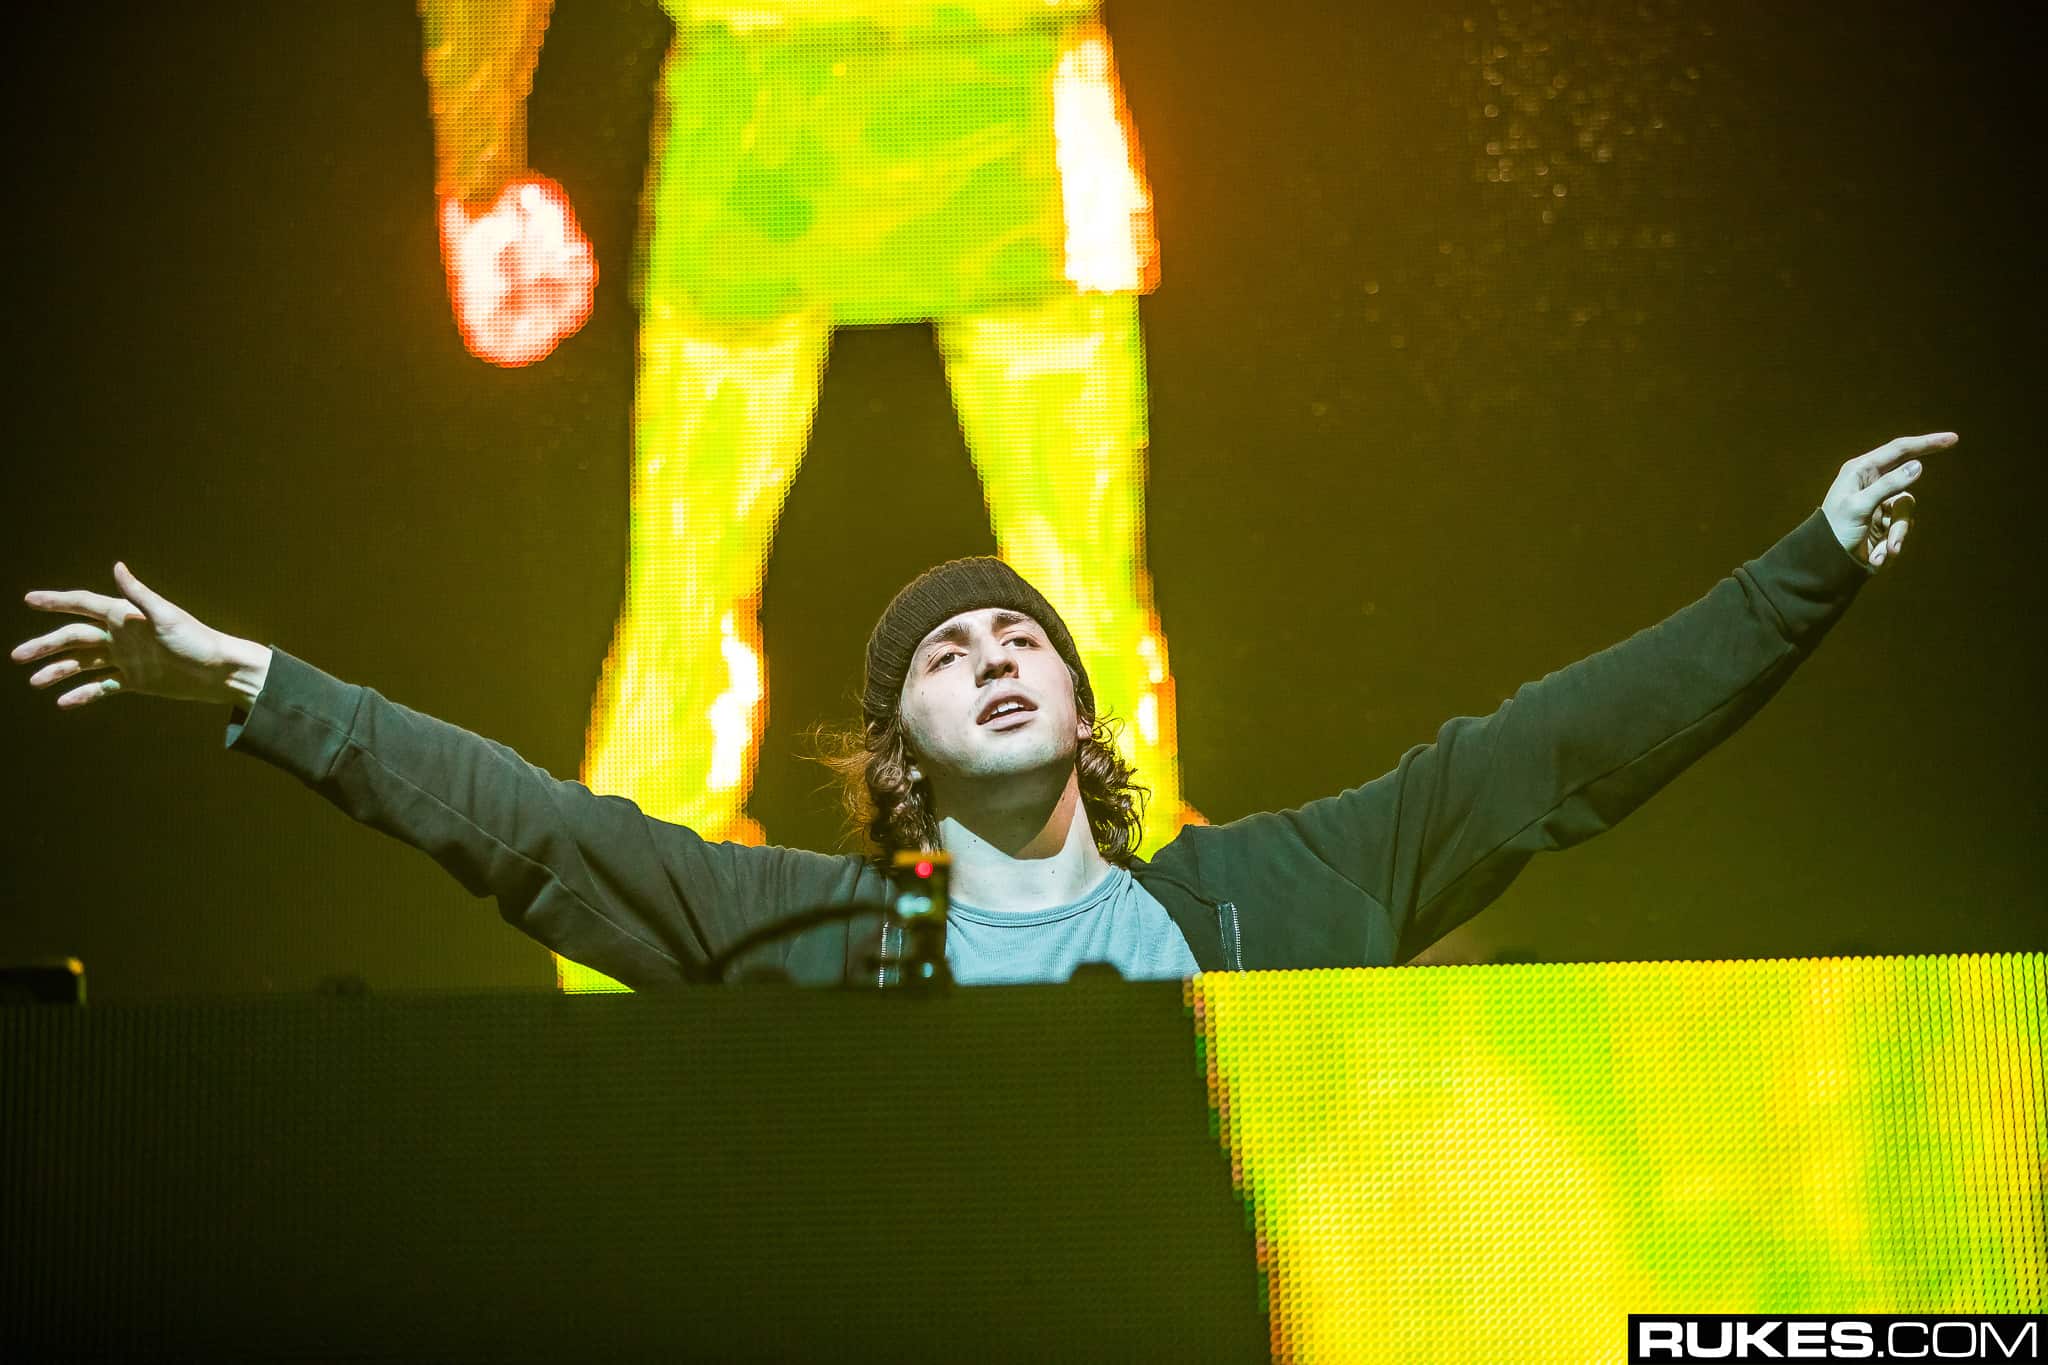 Porter Robinson set to release ‘Look at the Sky’ January 27